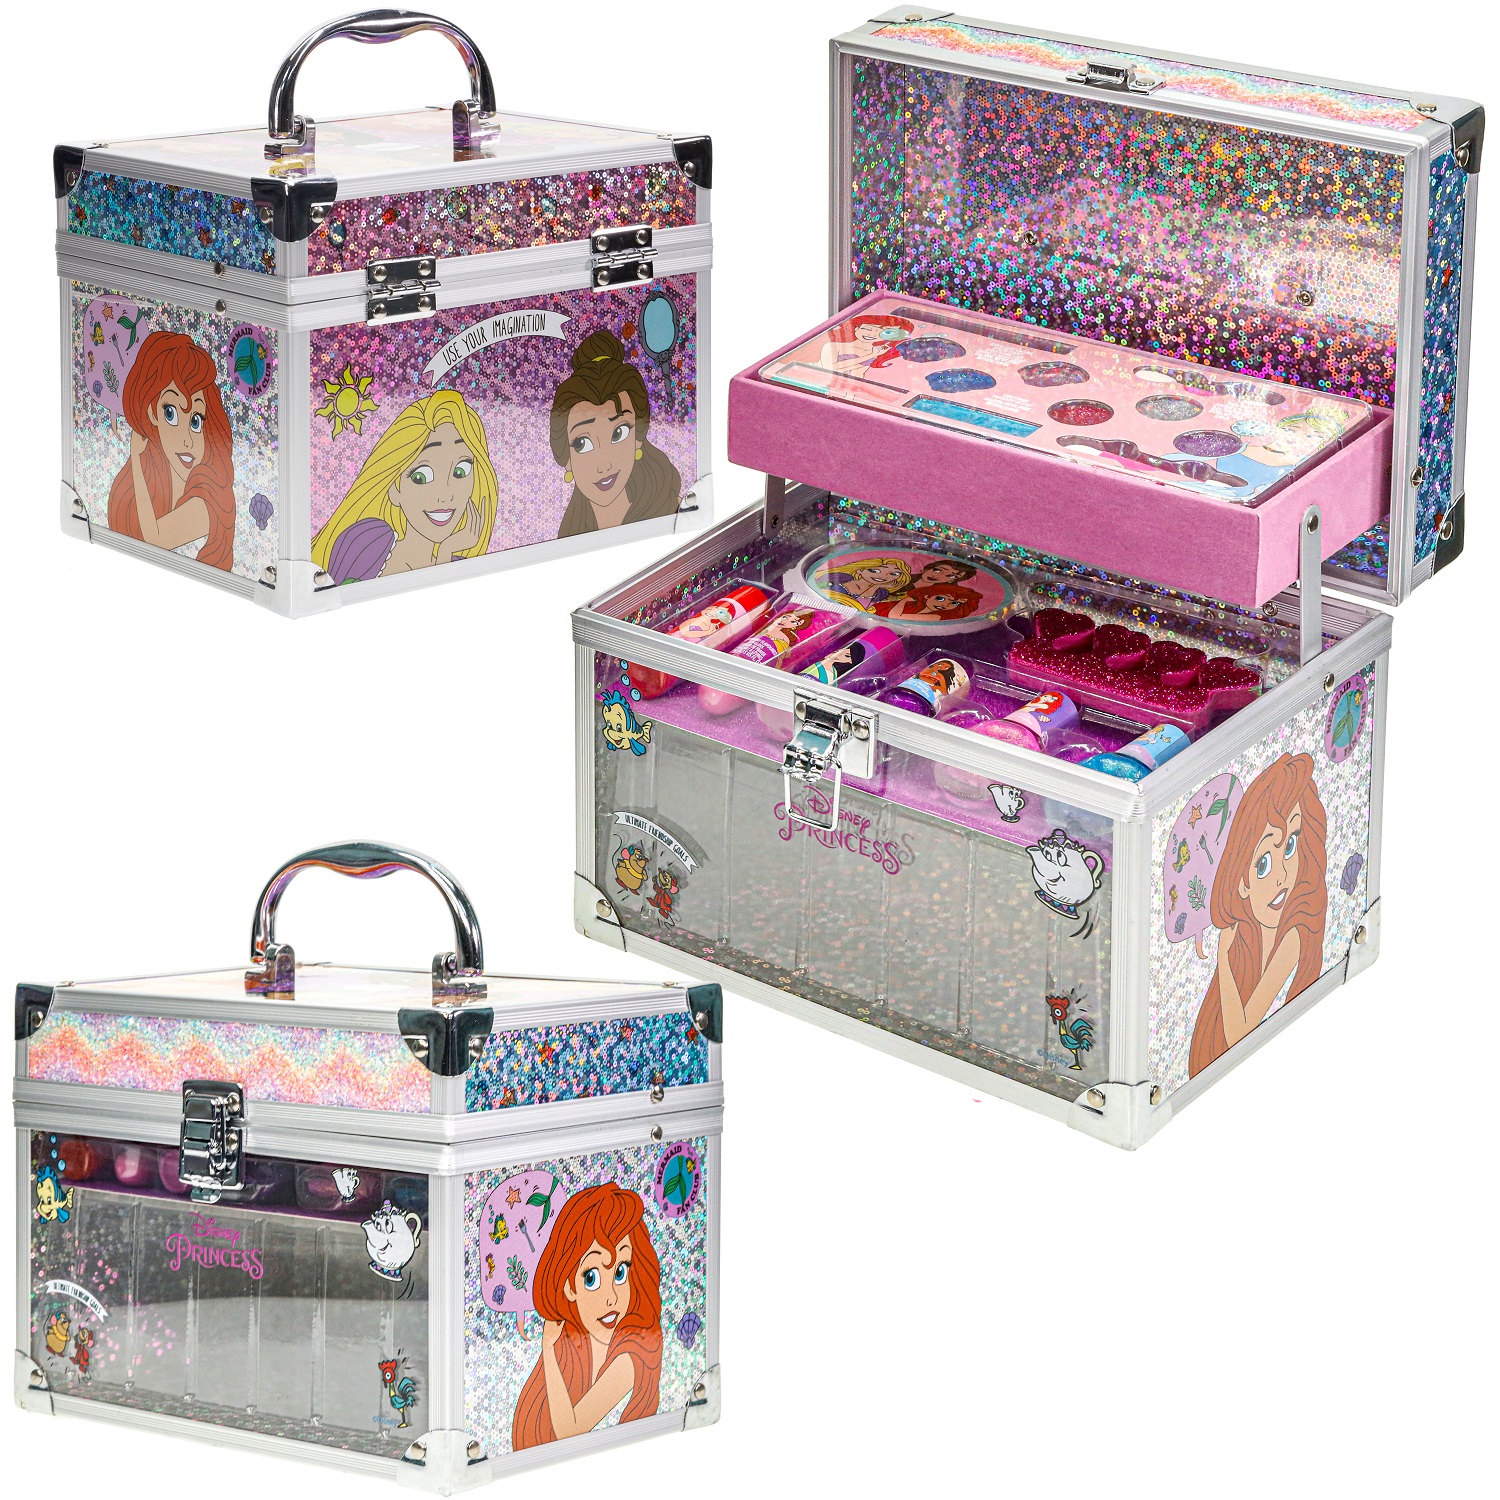 Disney Princess Train Case Pretend Play Cosmetic Set- Kids Beauty, Toy, Gift for Girls, Ages 3+ by Townley Girl - image 5 of 10